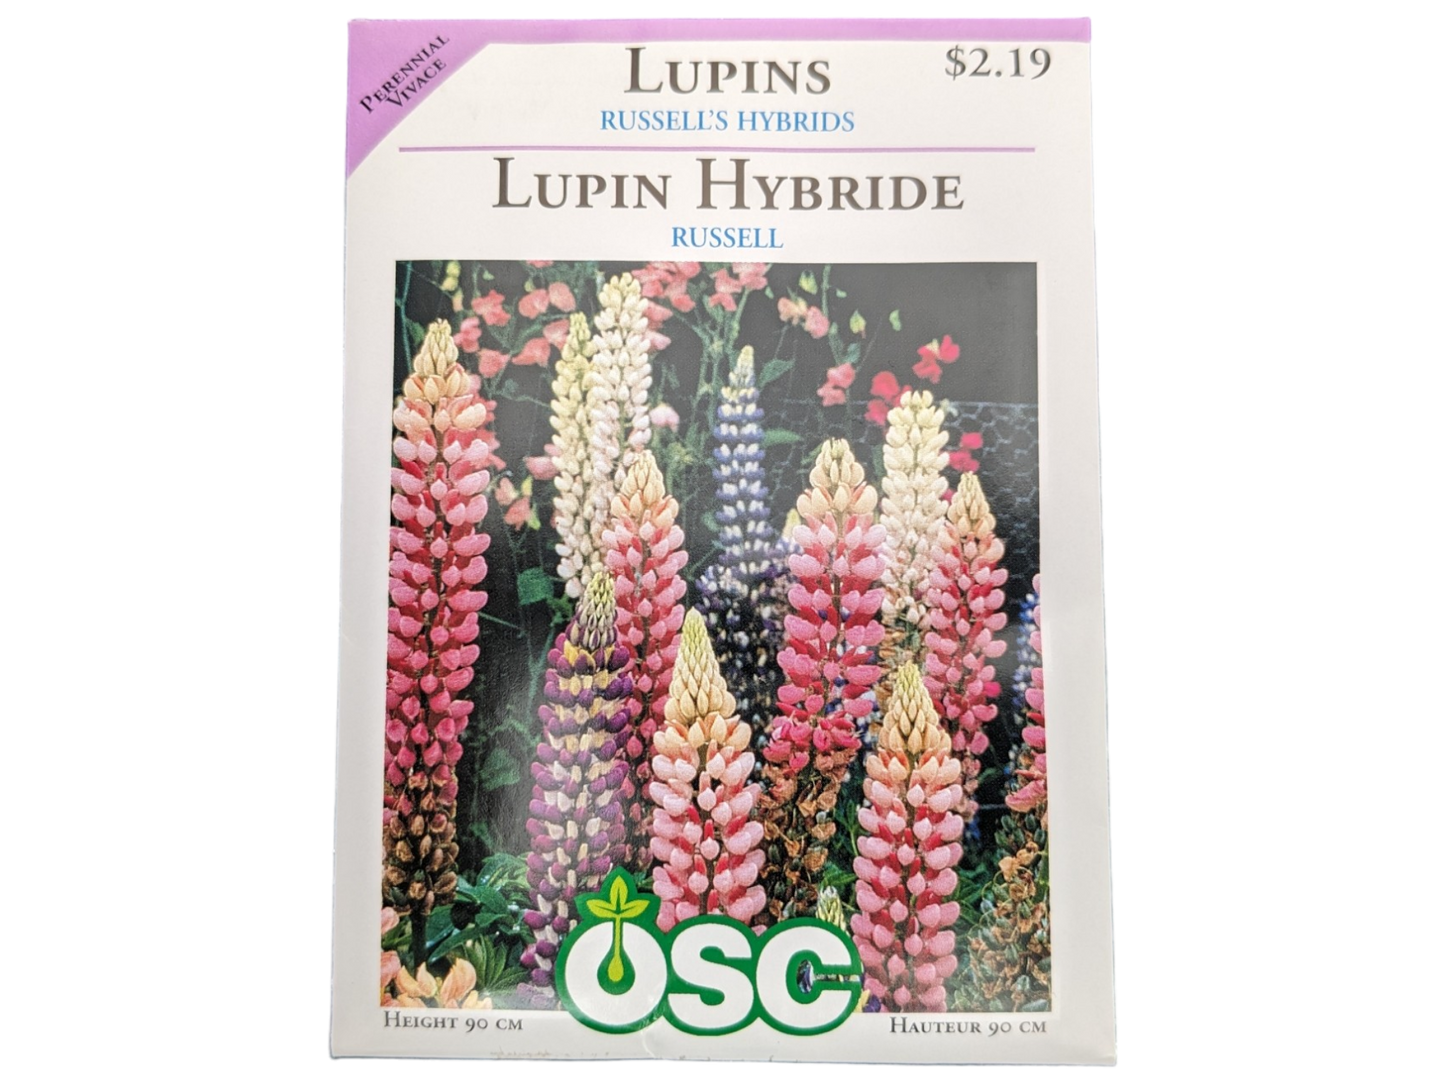 Lupins Russell's Hybrids